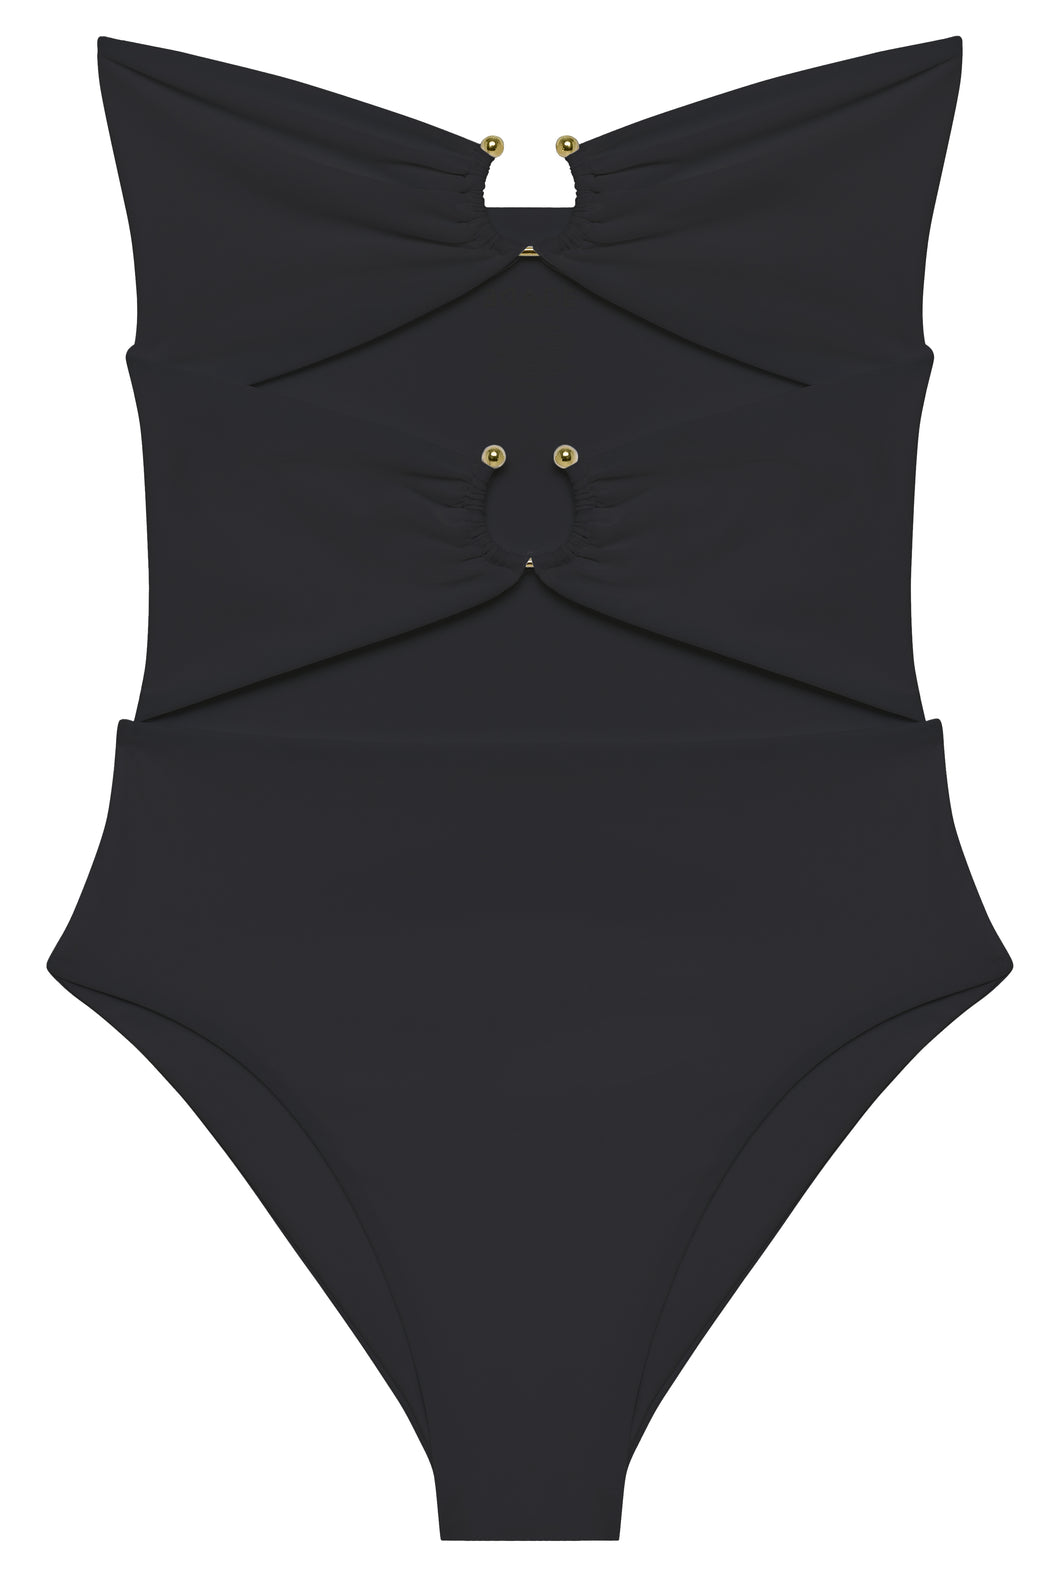 Flat image of the Ella One Piece in black